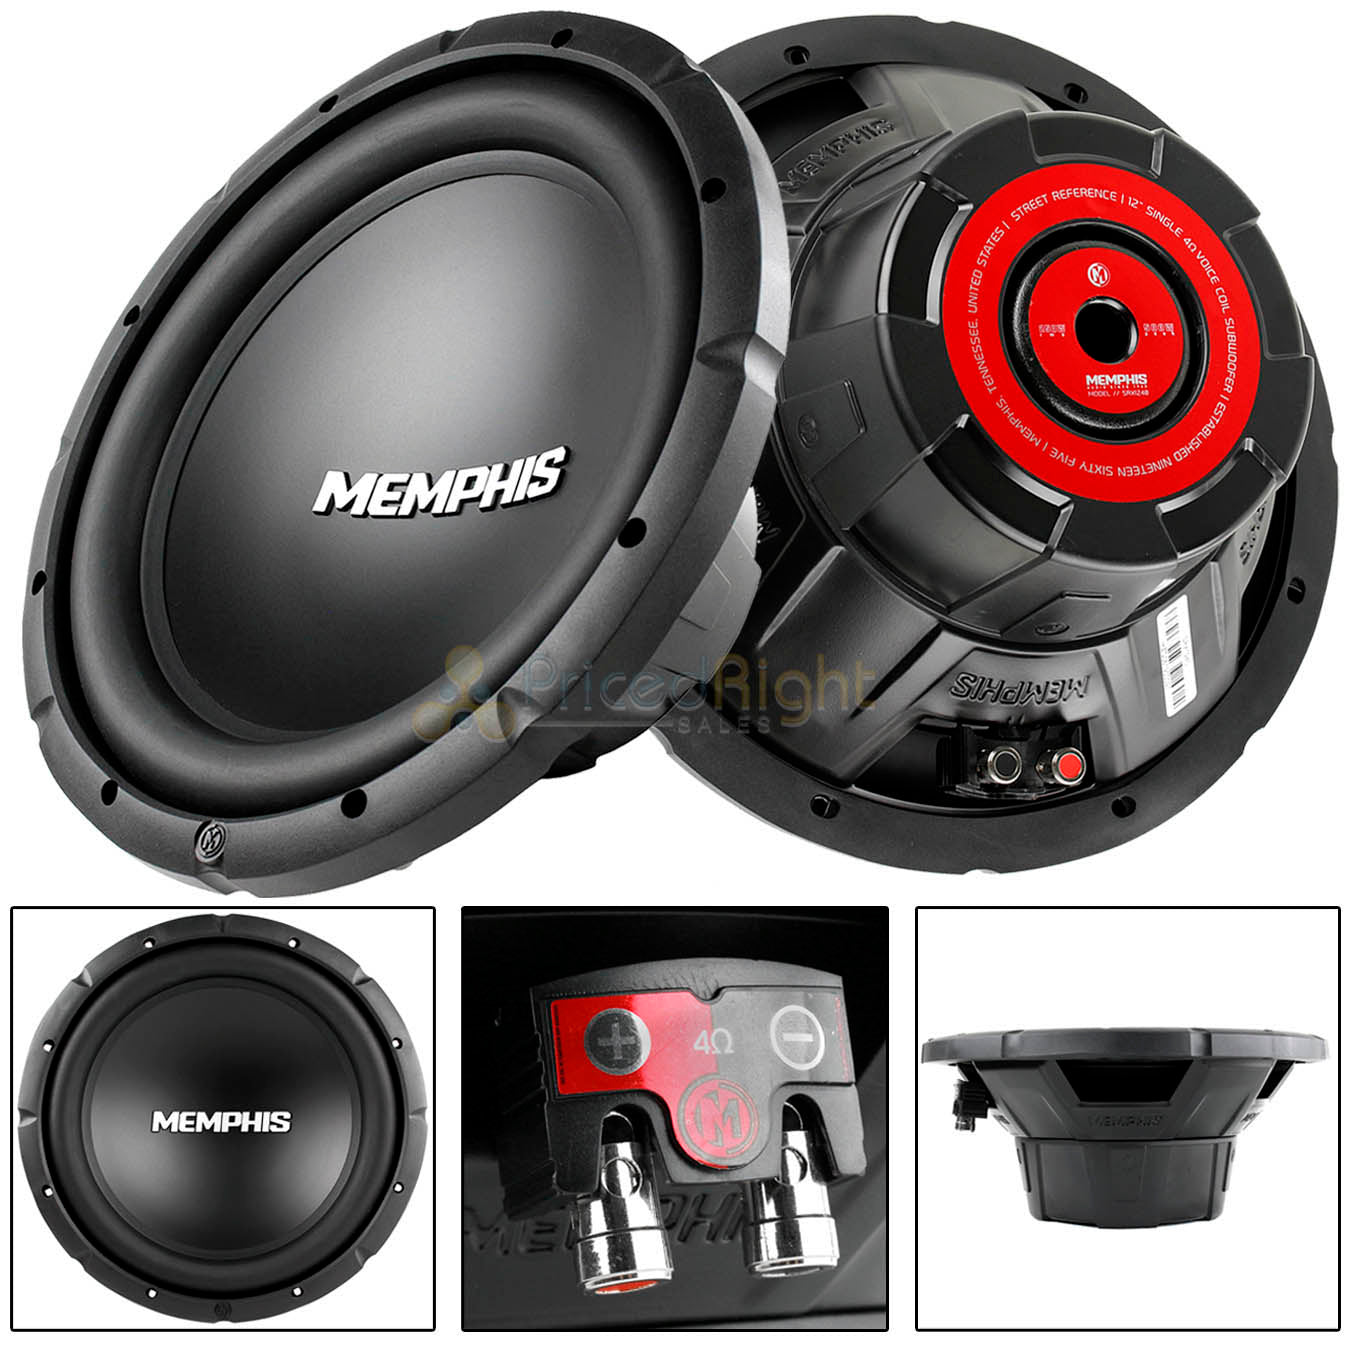 2 Pack Memphis 12" Subwoofer 500 Watts Max SVC 4 Ohm Street Reference SRX1240